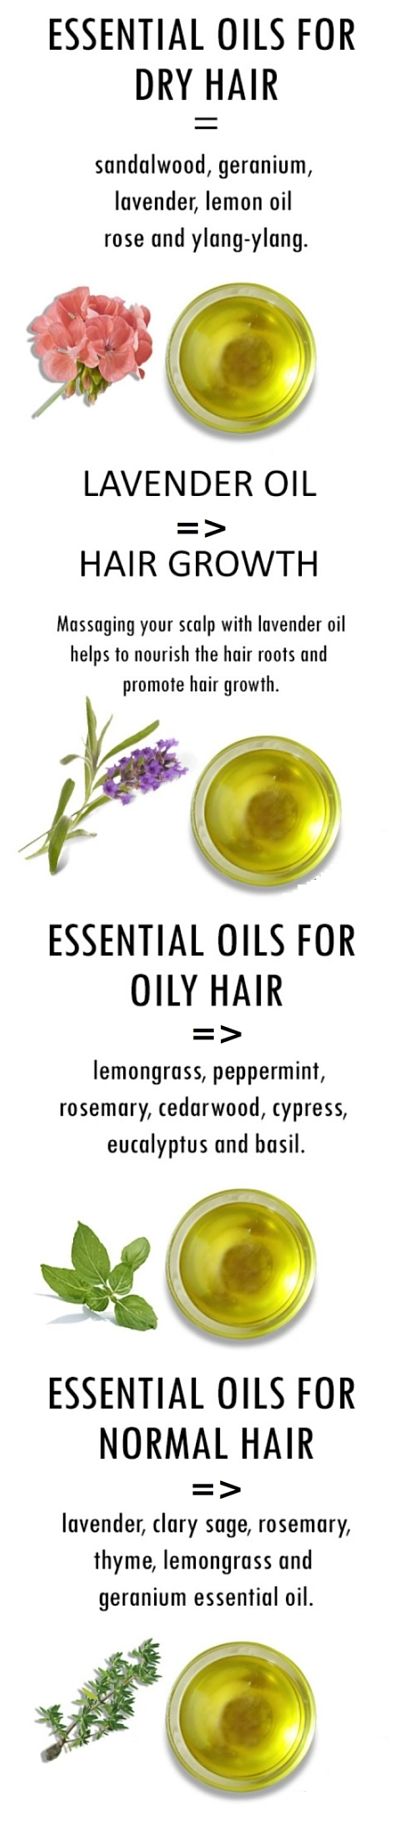 Ways to using natural essential oils for keeping your hair healthy, shiny and manageable